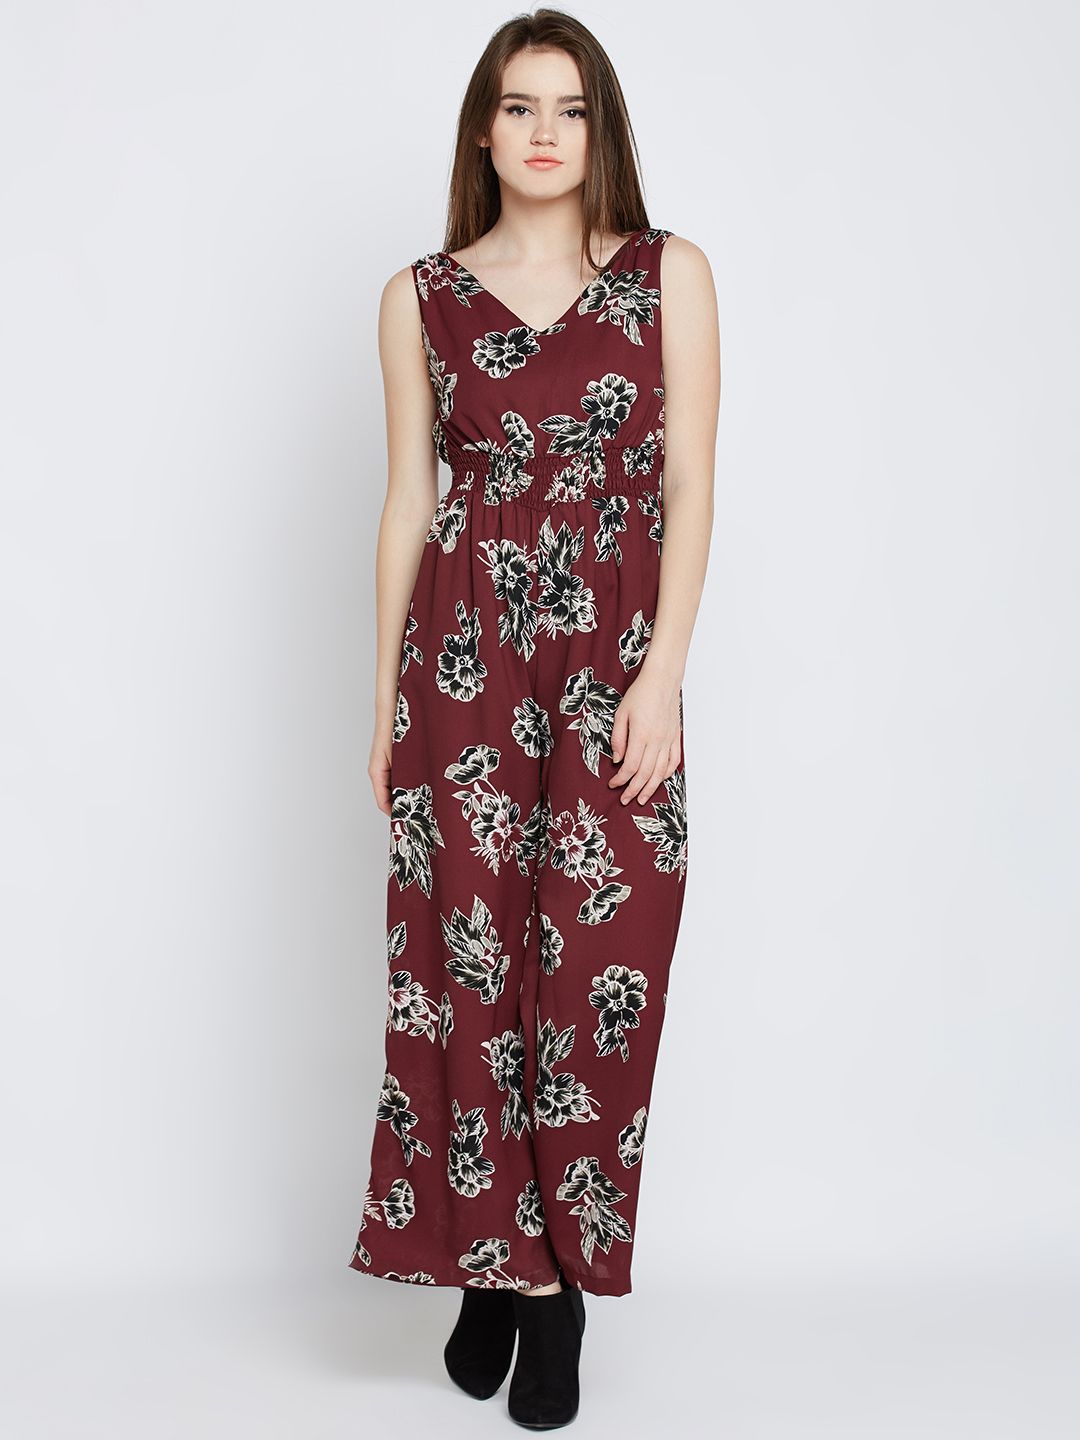 Marie Claire Brown & Black Floral Print Jumpsuit Price in India